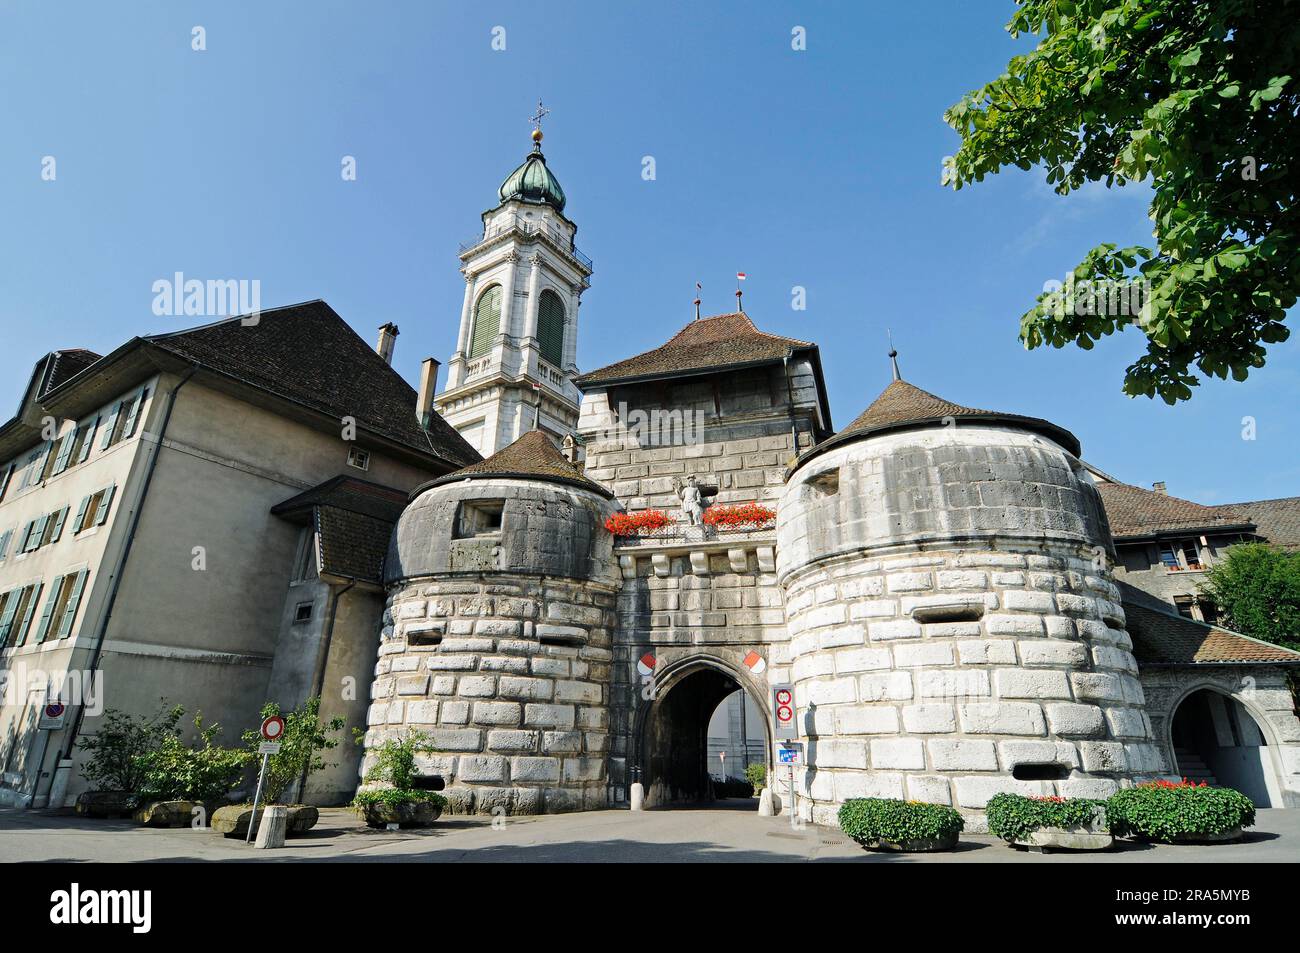 City Gate, St. Ursus Cathedral, Basle Gate, Church Tower of St. Ursus Cathedral, Solothurn, Switzerland Stock Photo